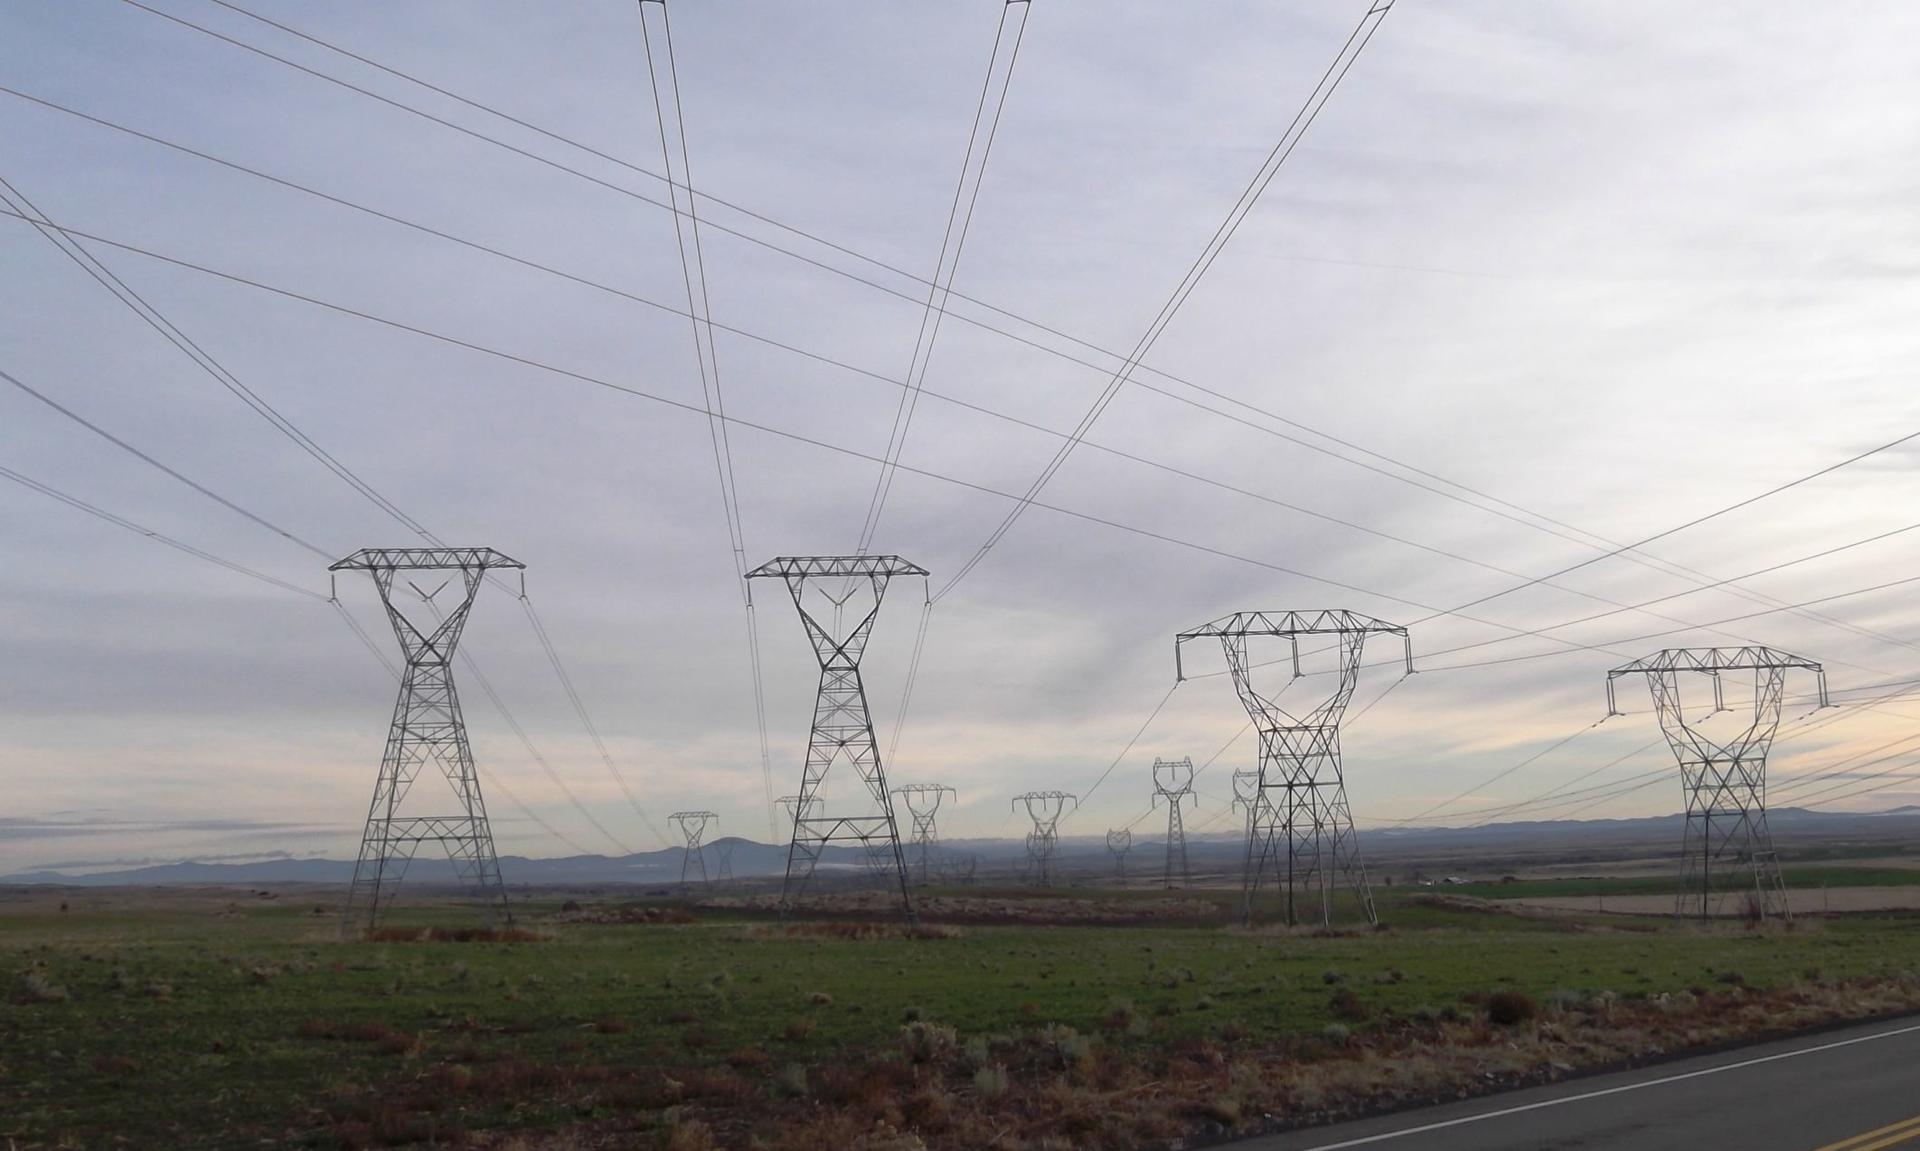 Power lines distribute hydropower from a dam on the Columbia River in Washington state. The Biden administration on Wednesday announced an initiative to improve the cybersecurity of critical infrastructure. (By brewbooks, CC BY-SA 2.0, https://commons.wikimedia.org/w/index.php?curid=52426263)